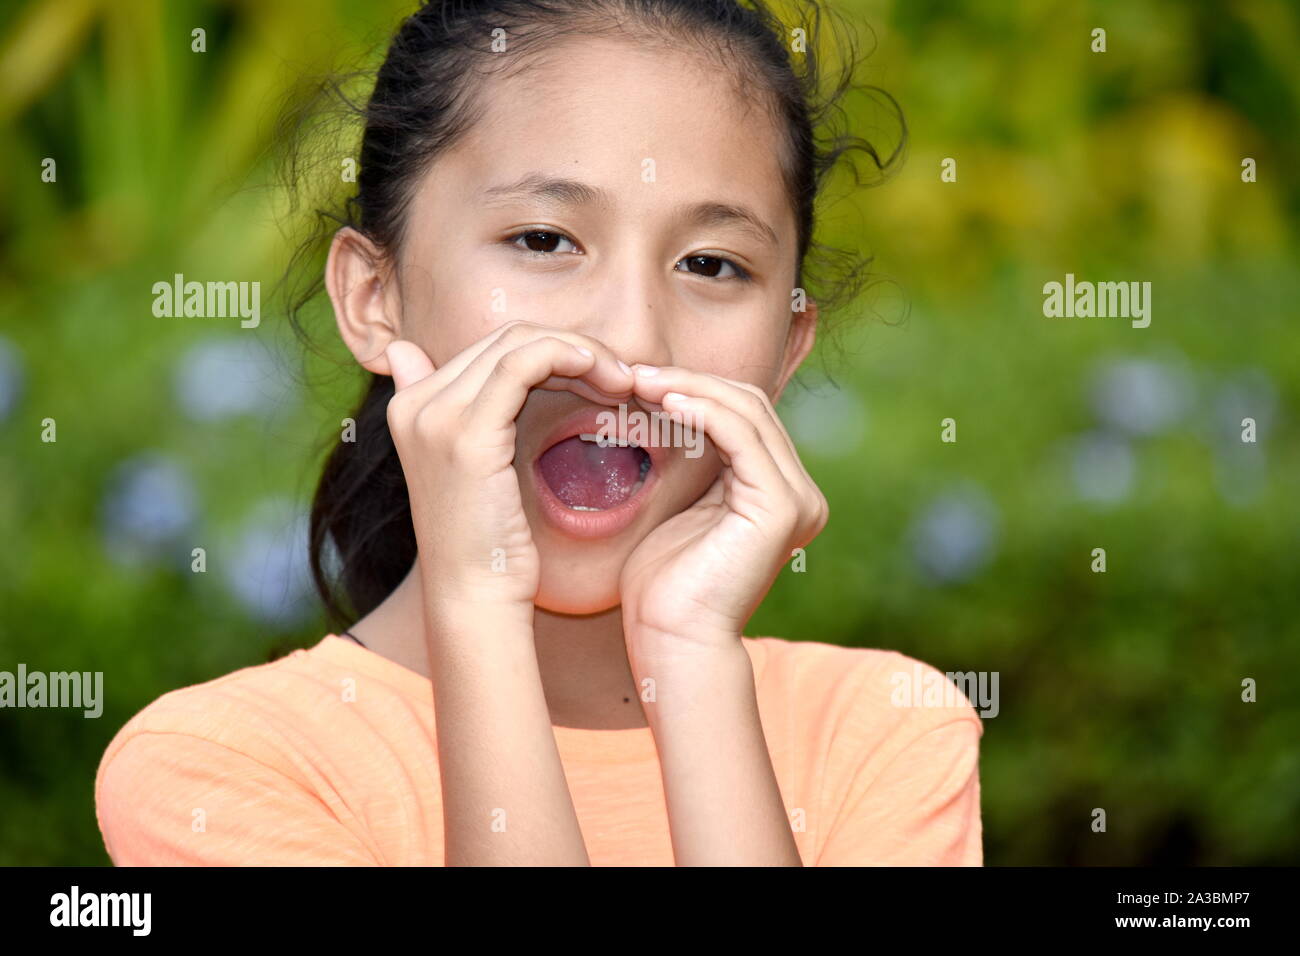 An A Teenager Girl Yelling Stock Photo